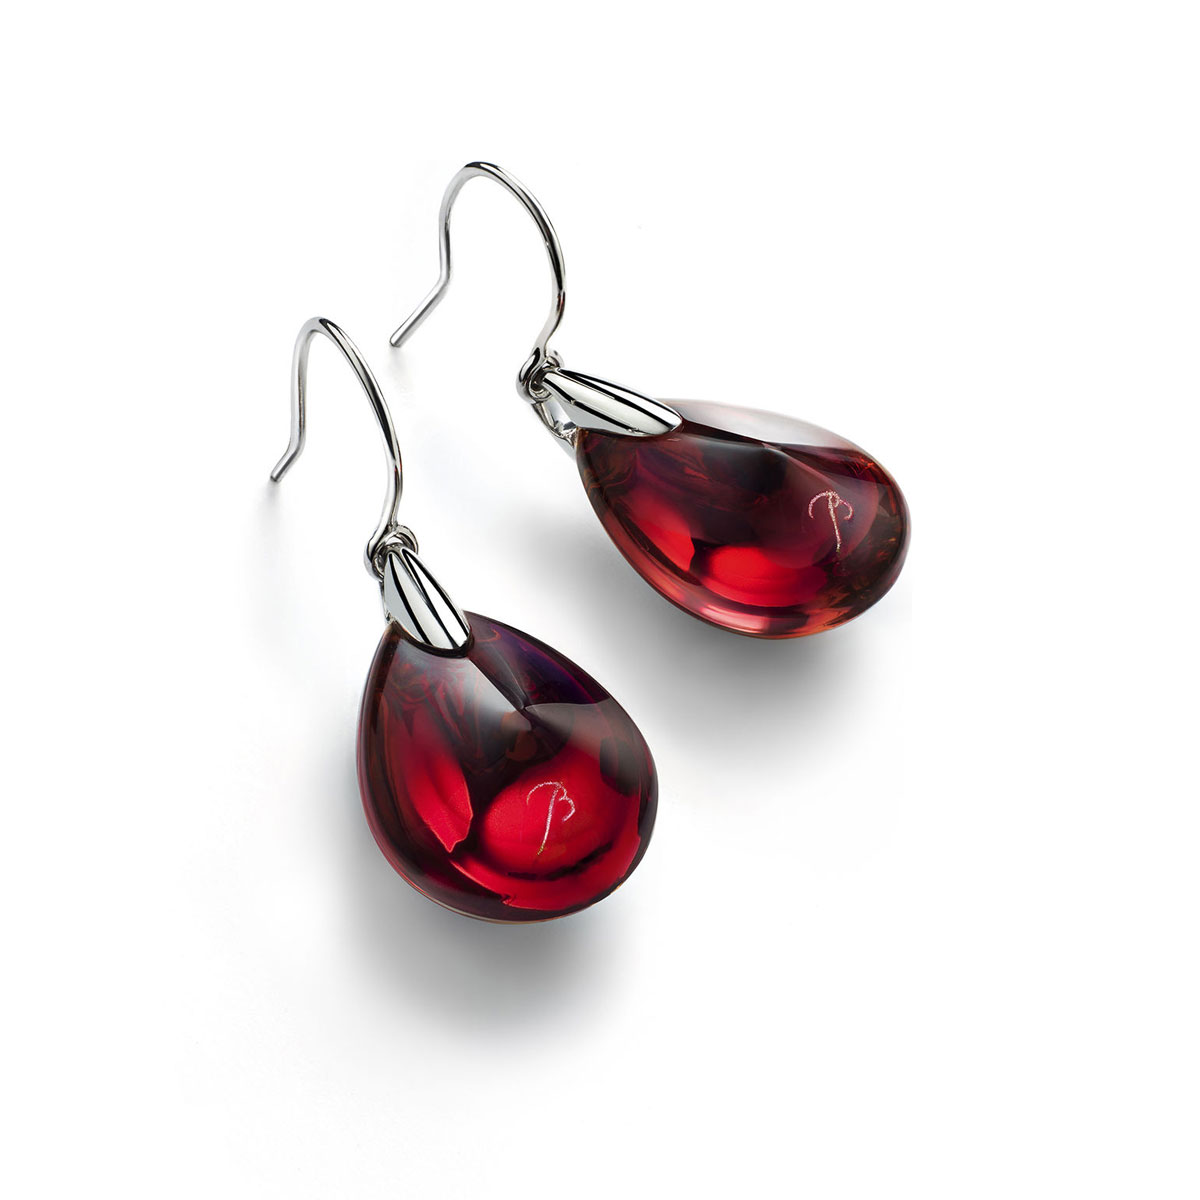 Baccarat Crystal Psydelic Wire Earrings Sterling Silver Iridescent Red